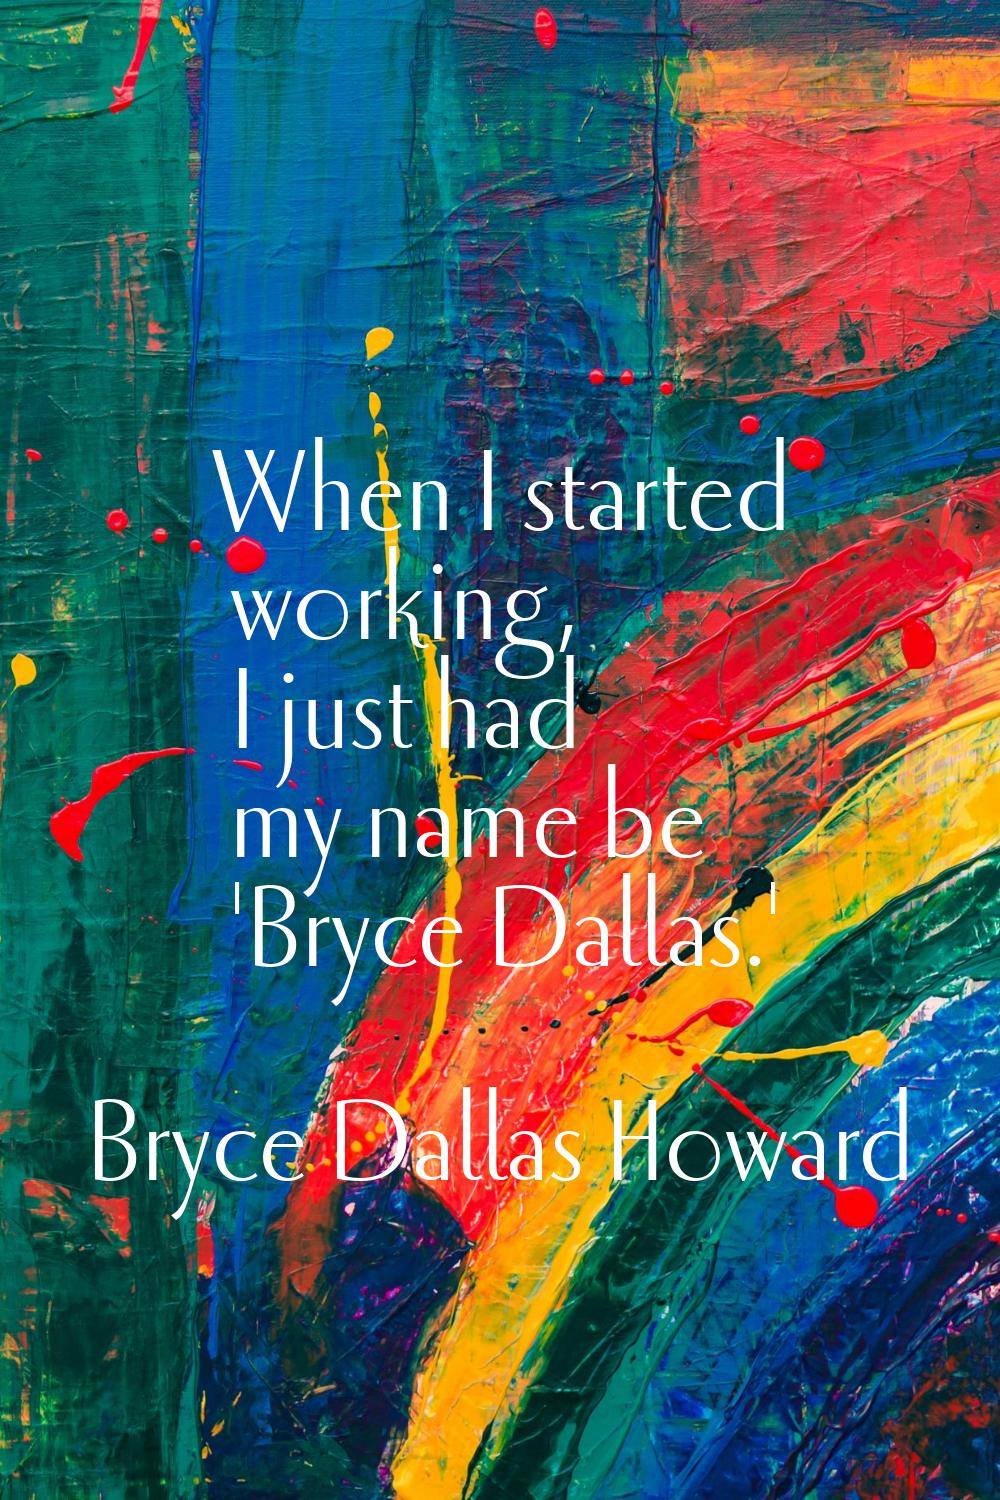 When I started working, I just had my name be 'Bryce Dallas.'